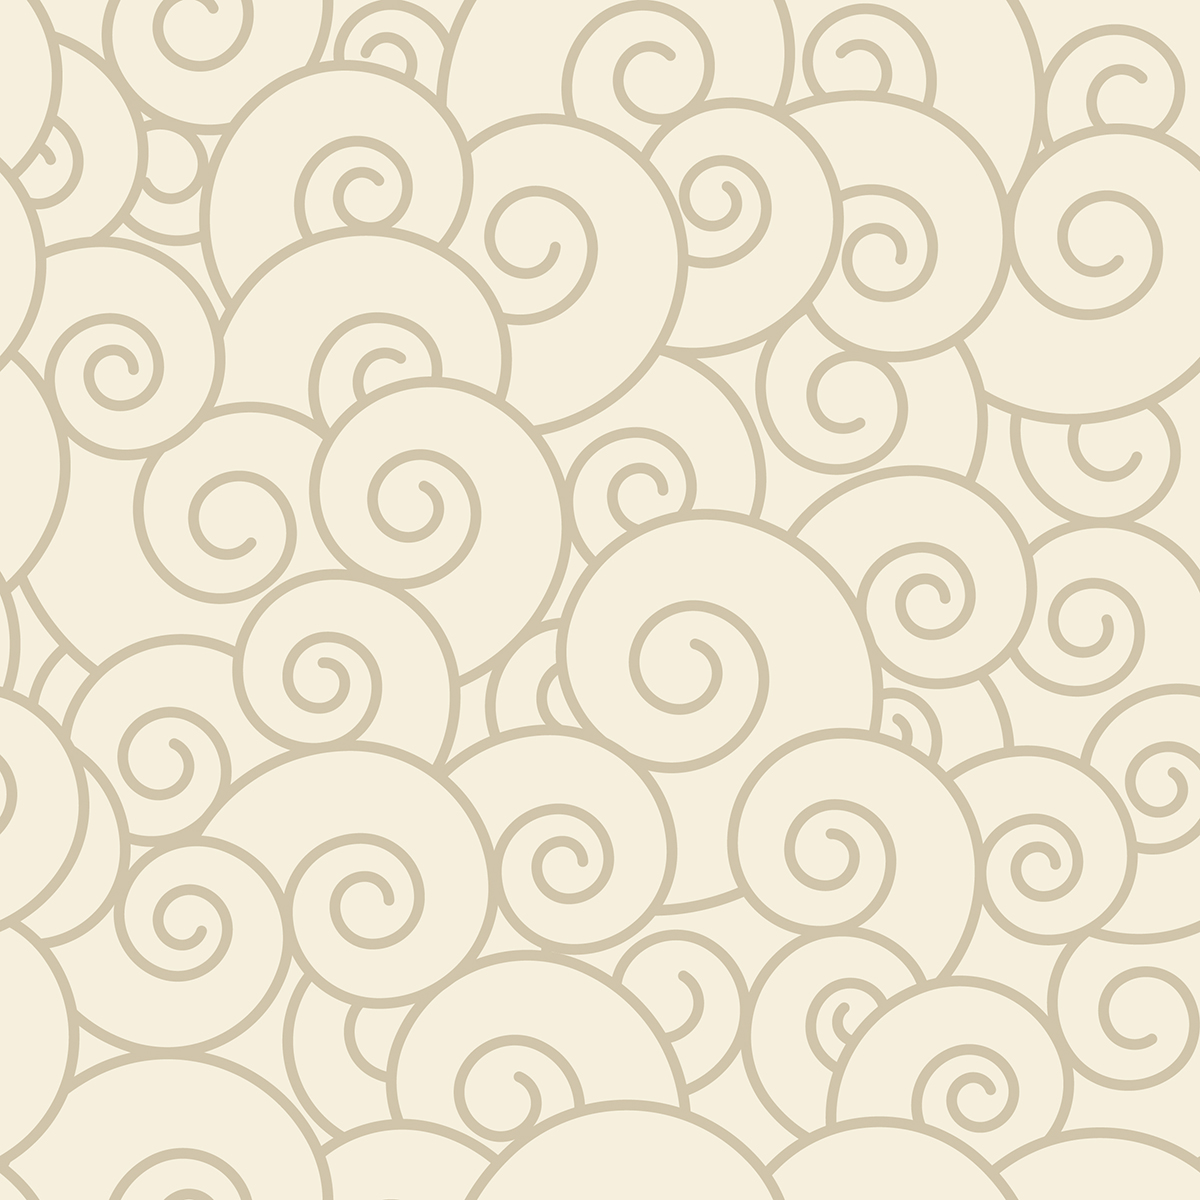 A pattern of spirals on a white background